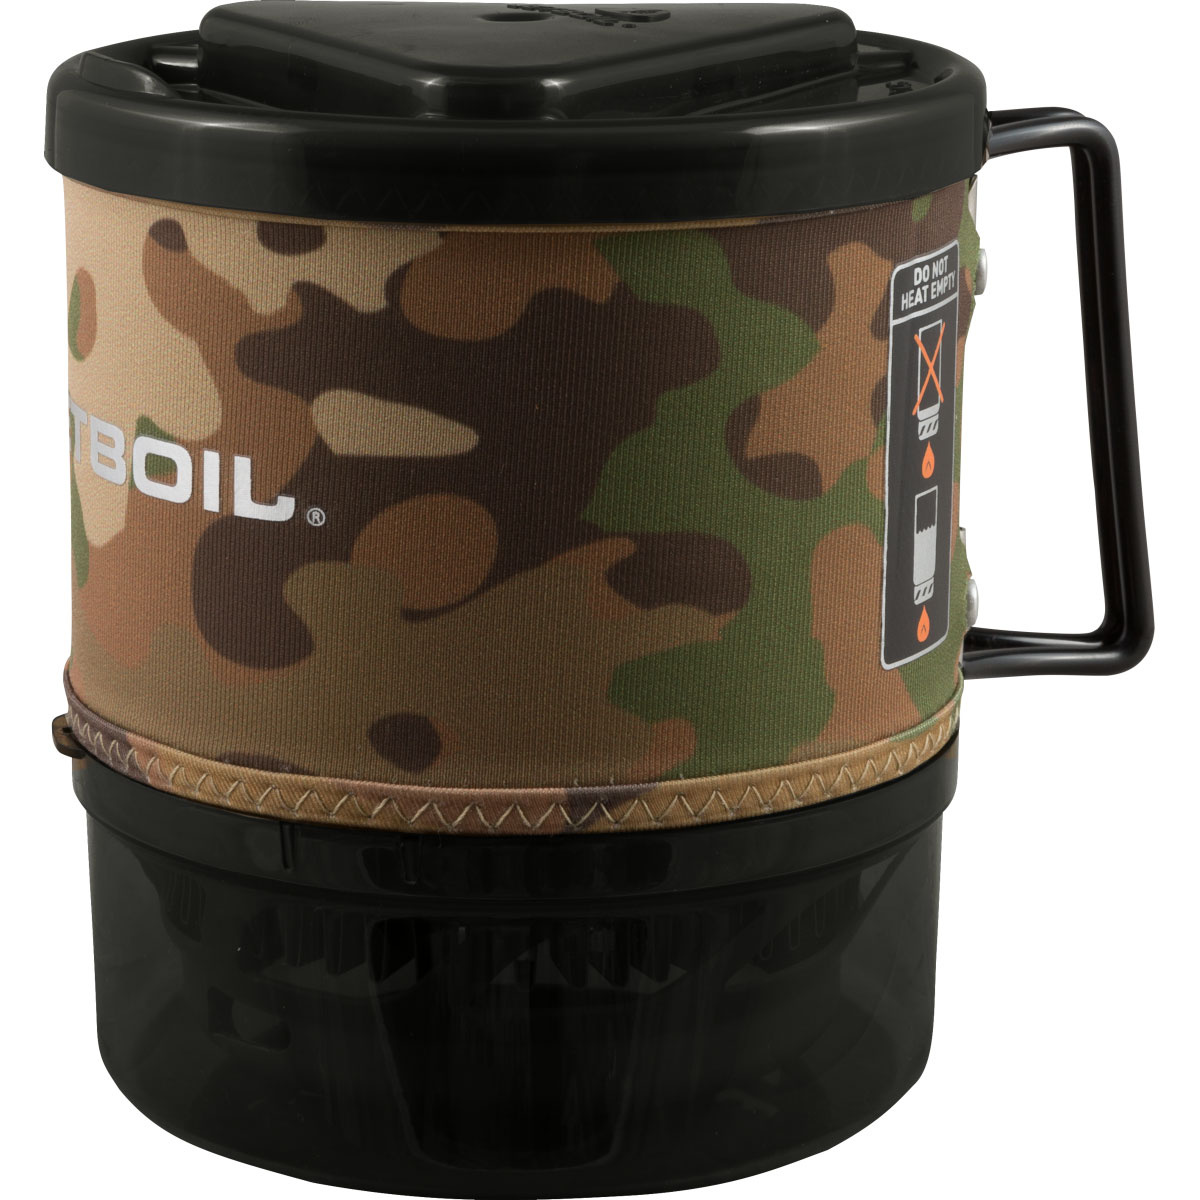 Image of Jetboil Fornello MiniMo